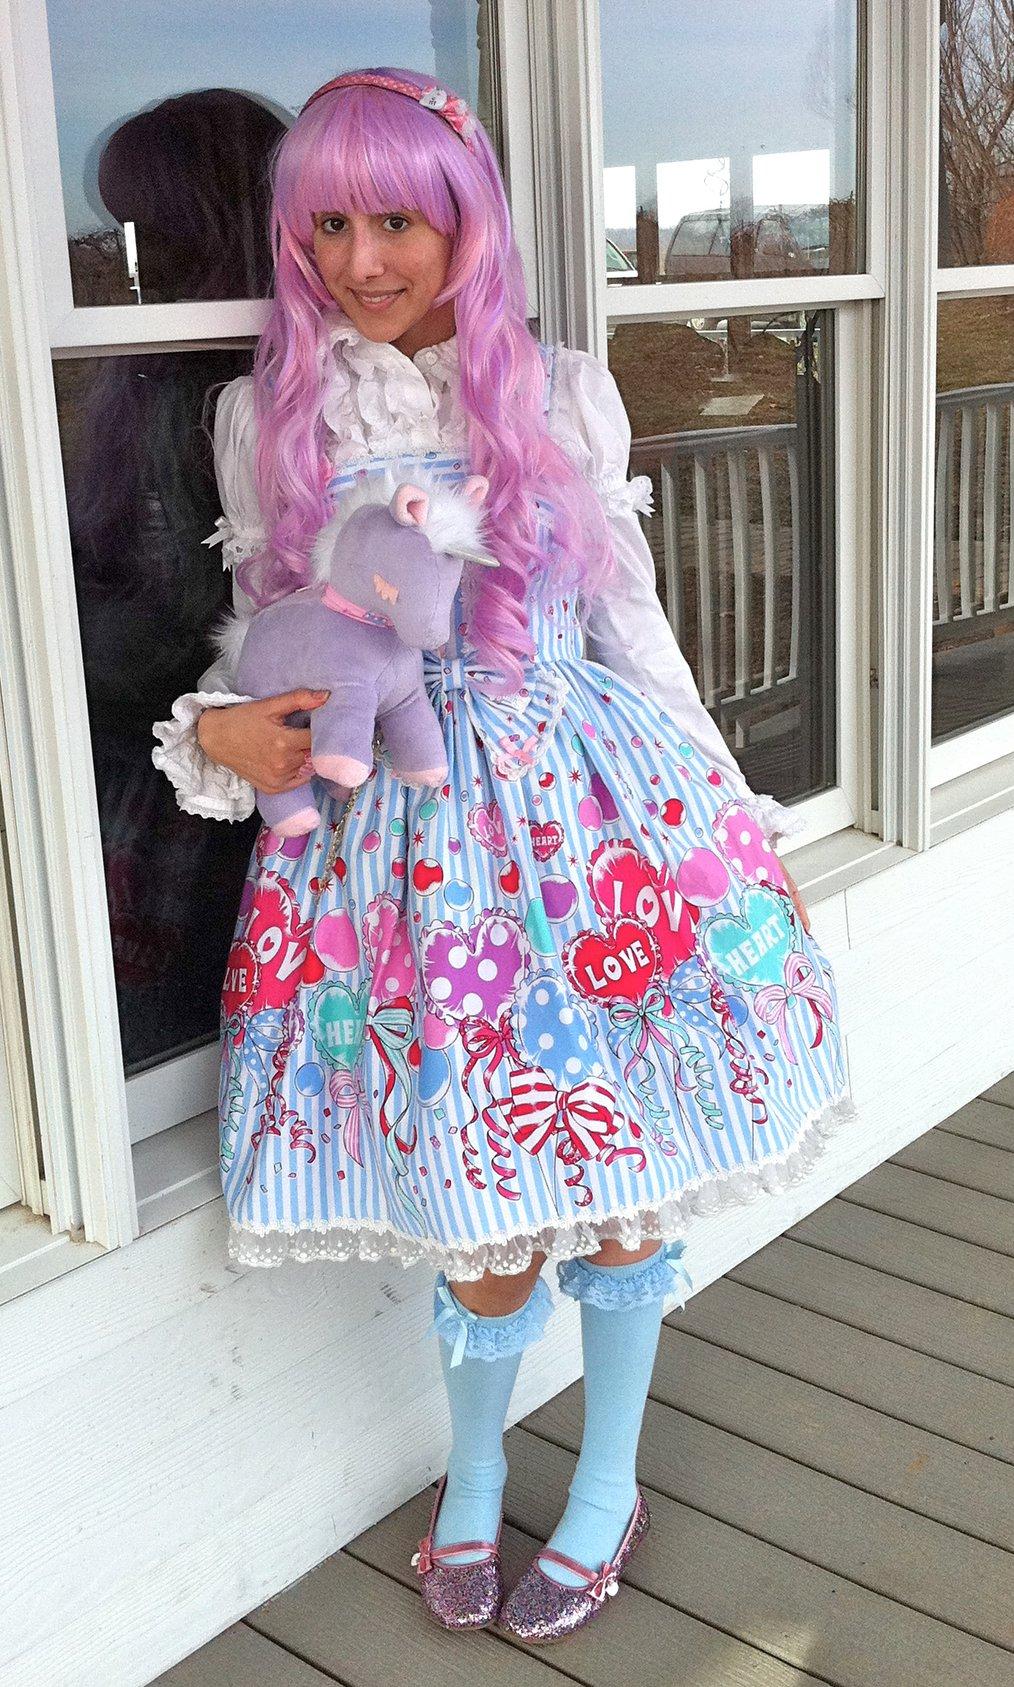 Lolita with Pink Hair wearing Blue Long Socks and Colored Dress